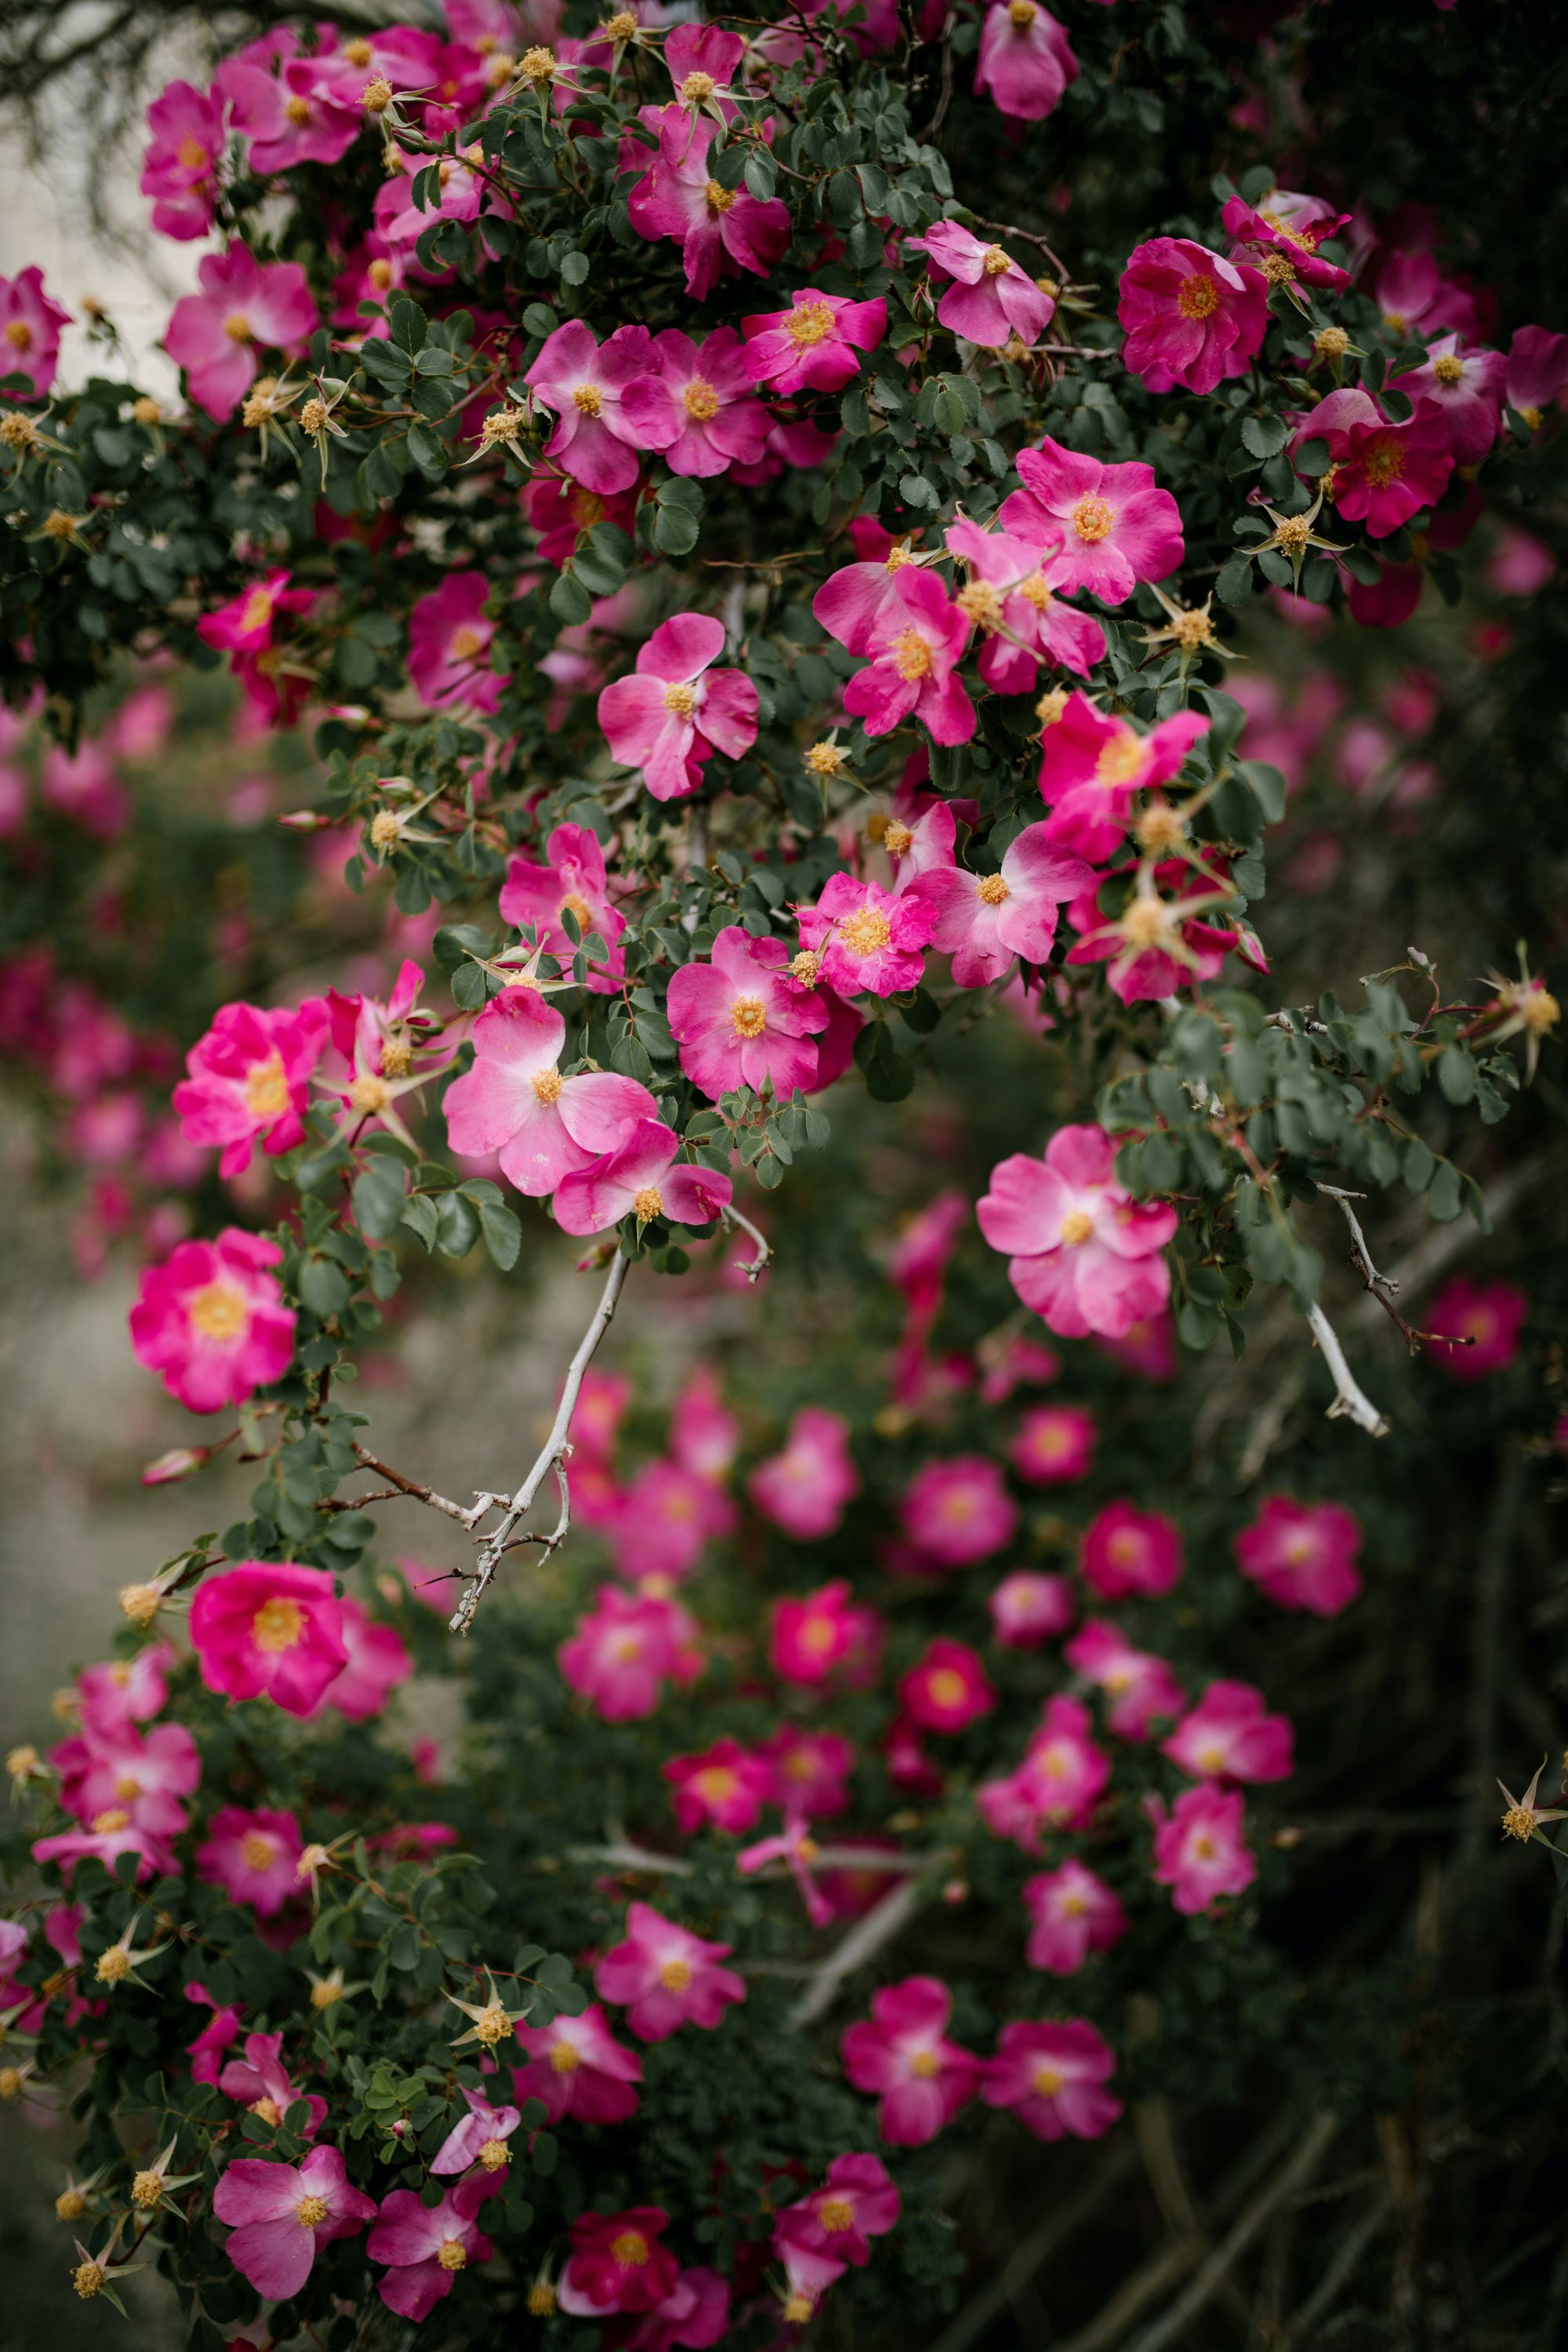 Photoe of pink flowers